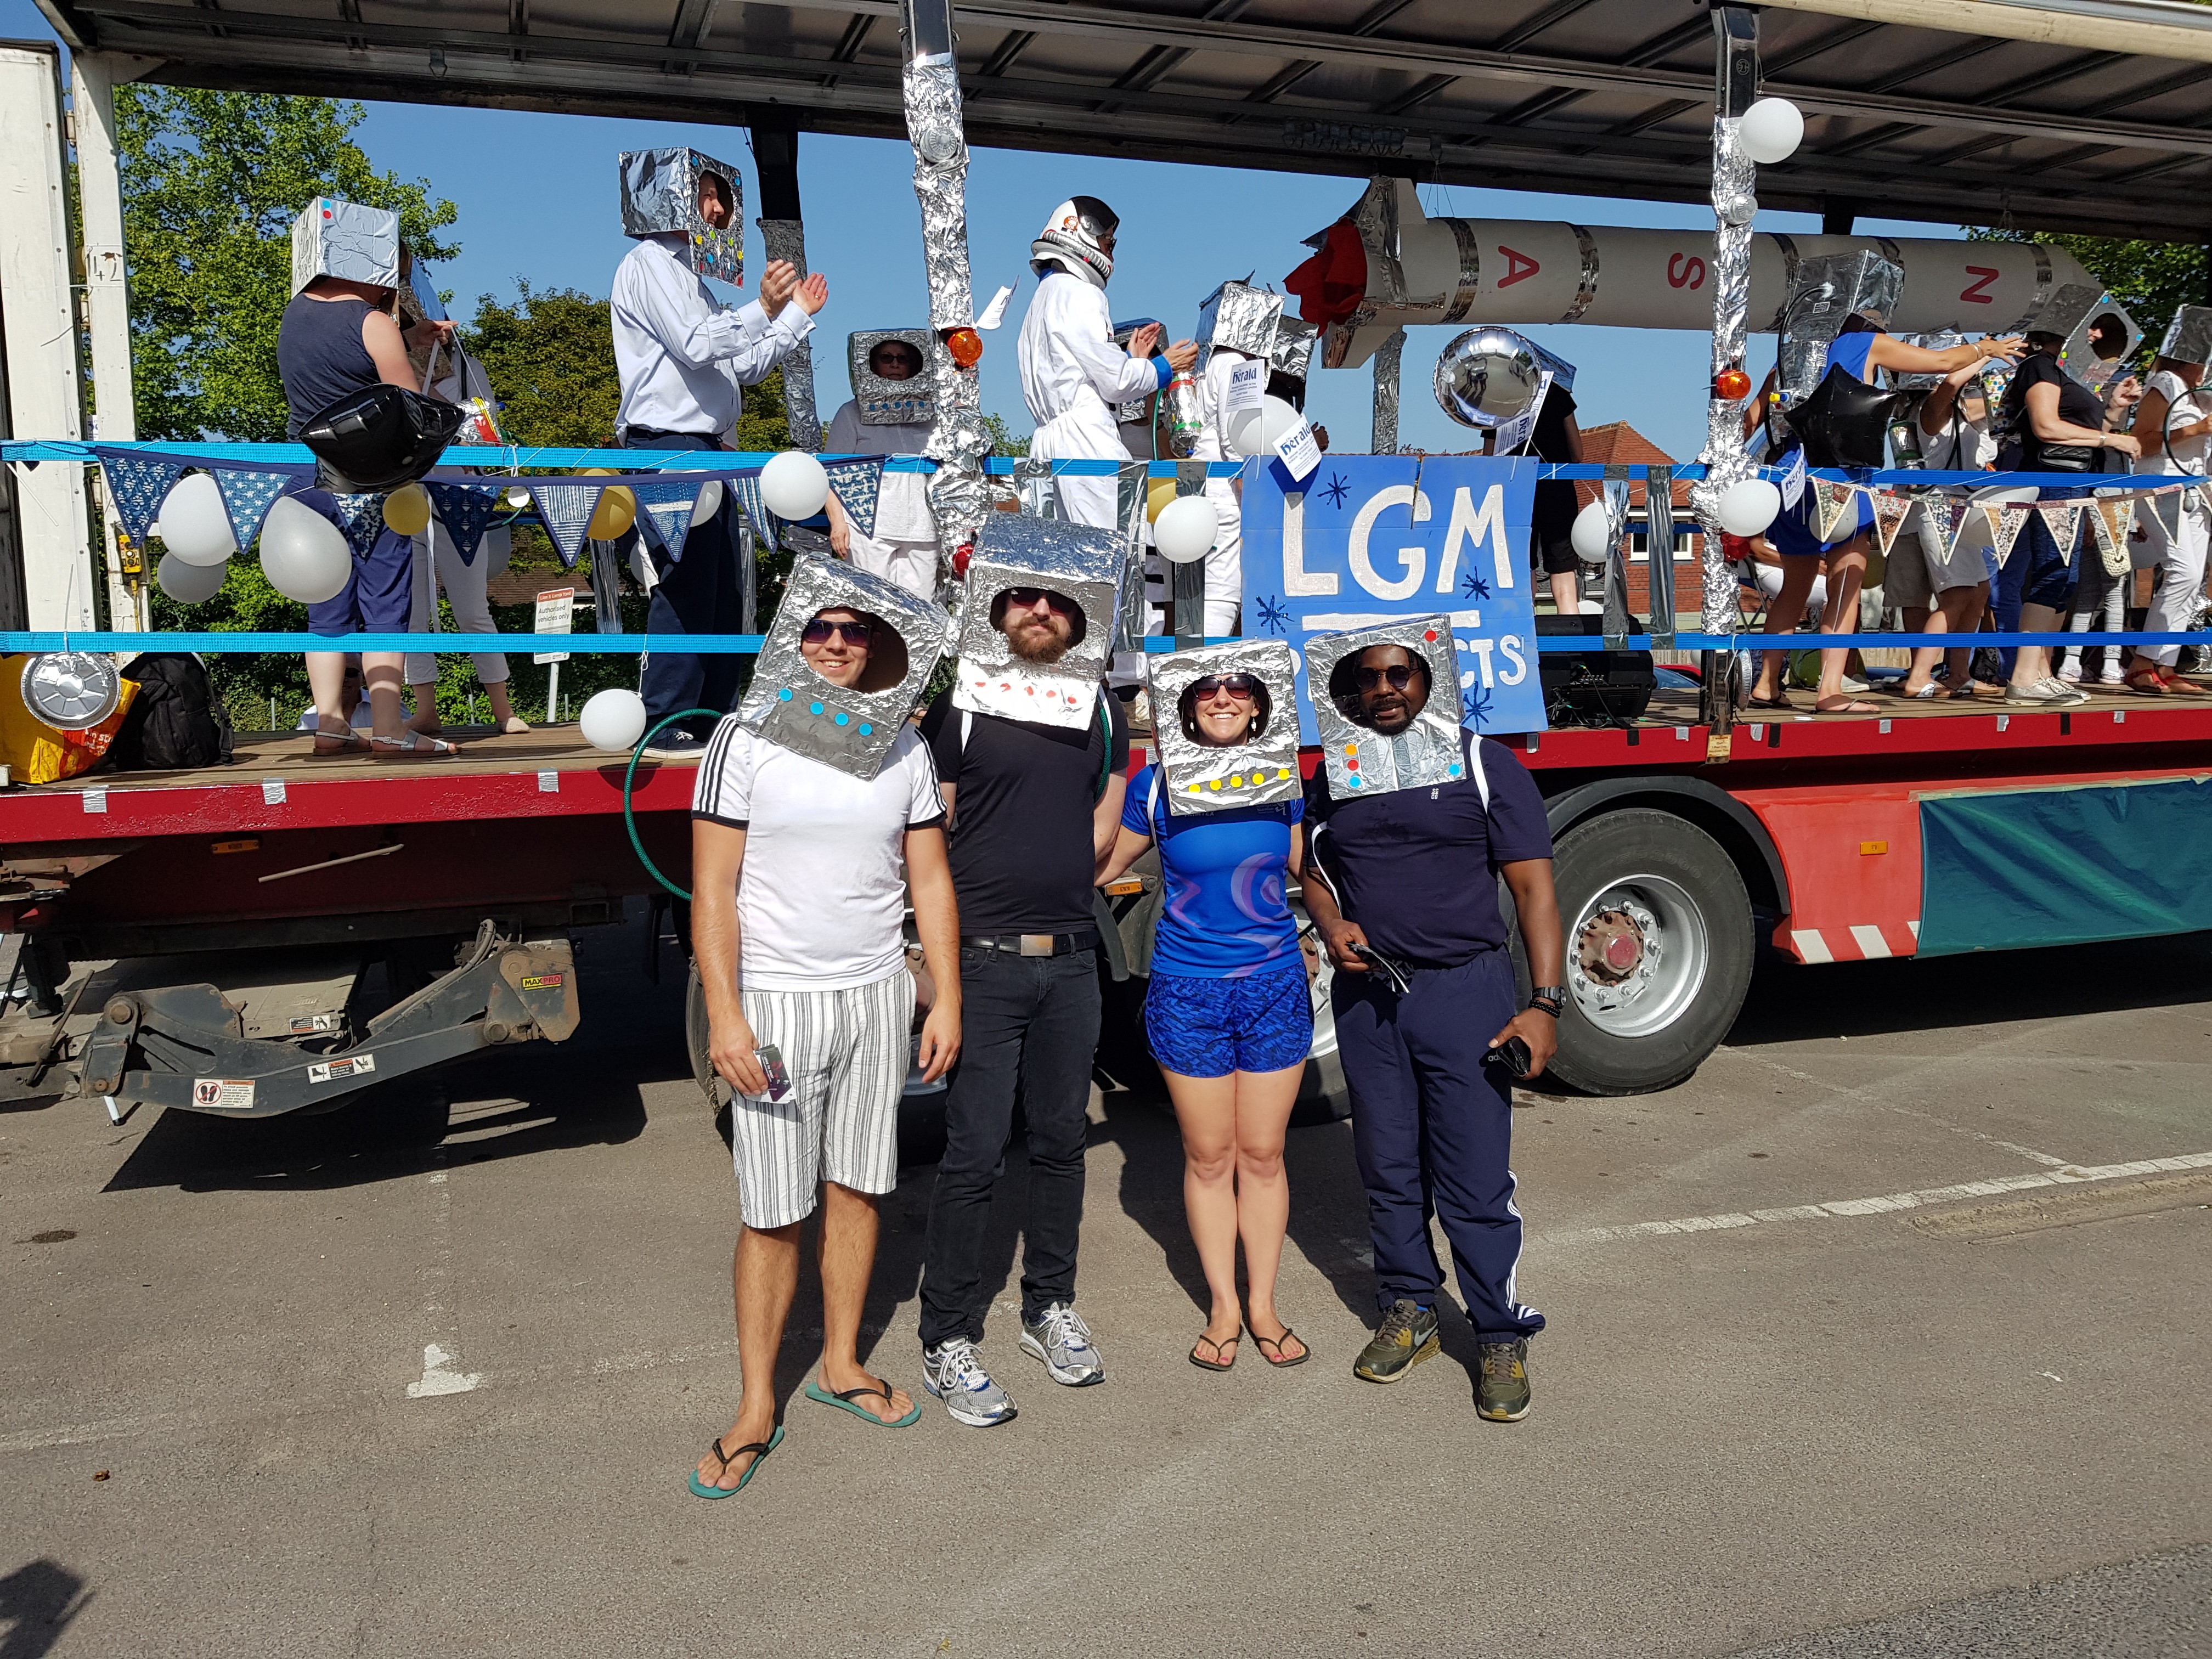 LGM Charity Event 2019